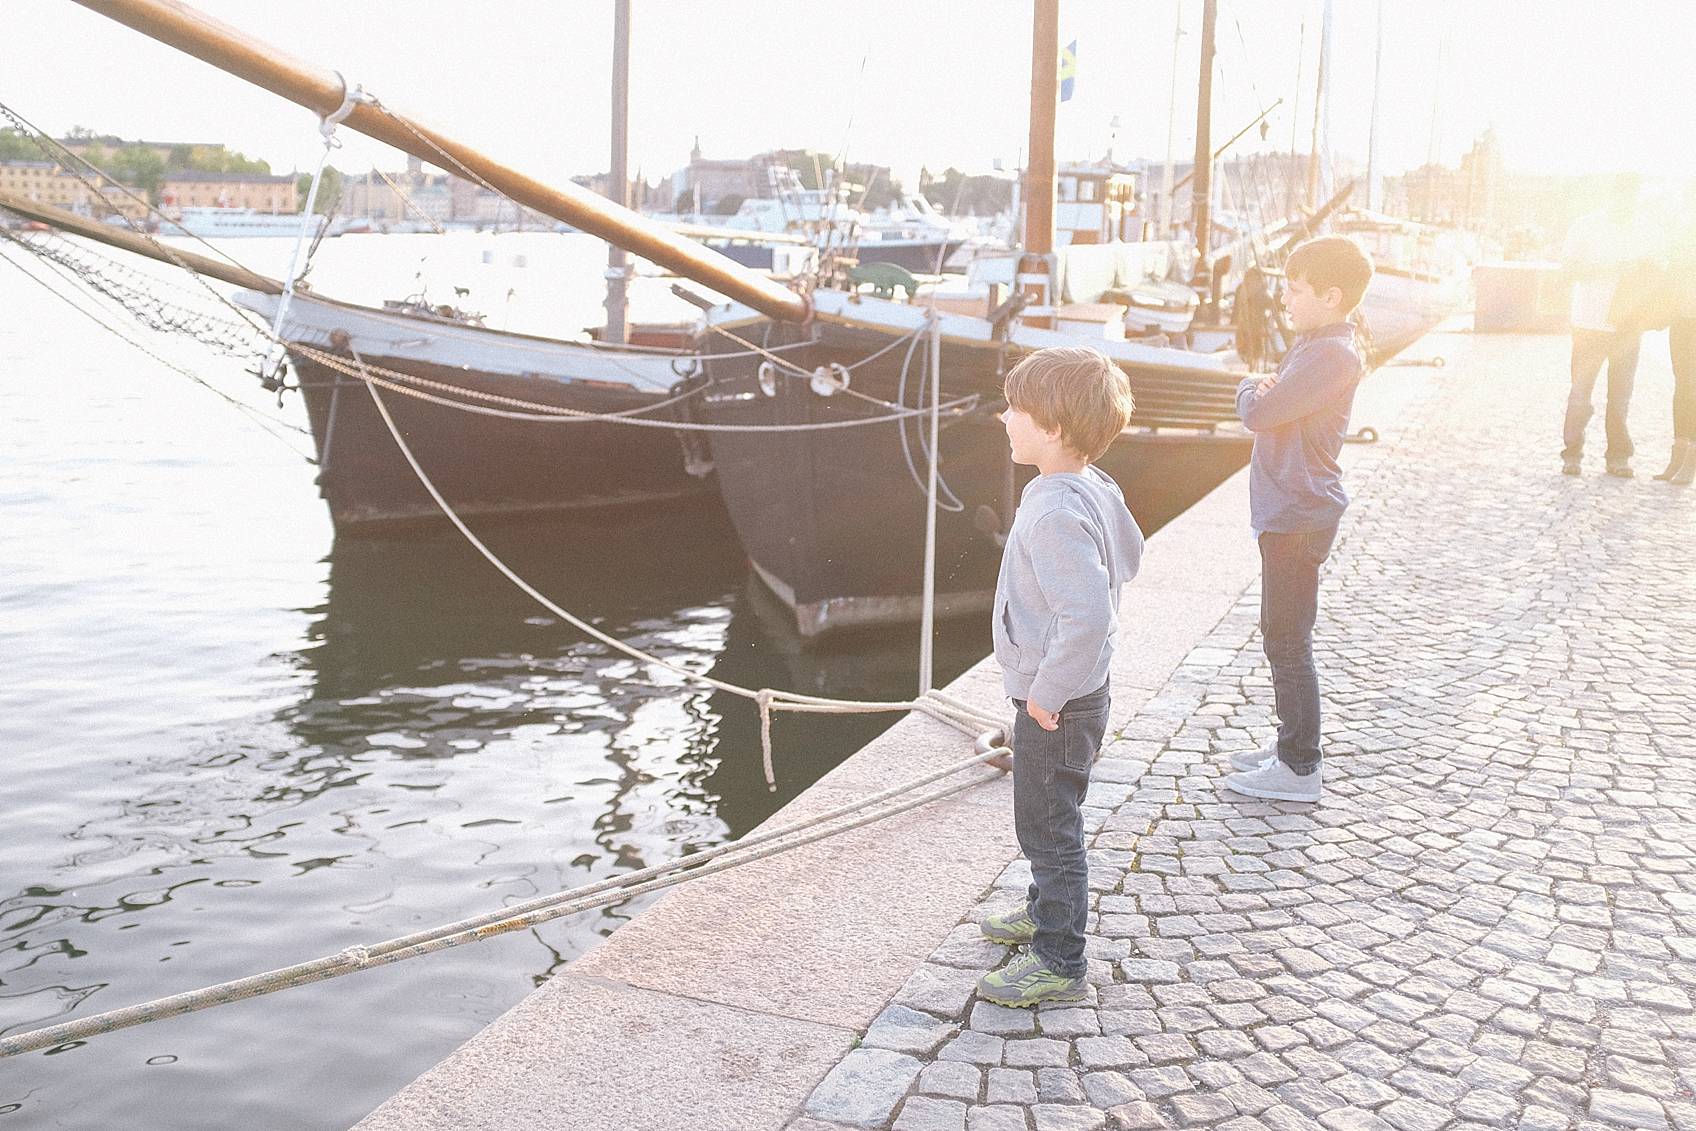 Photo tour of Stockholm: by the ocean ships boys watching a small boat go by